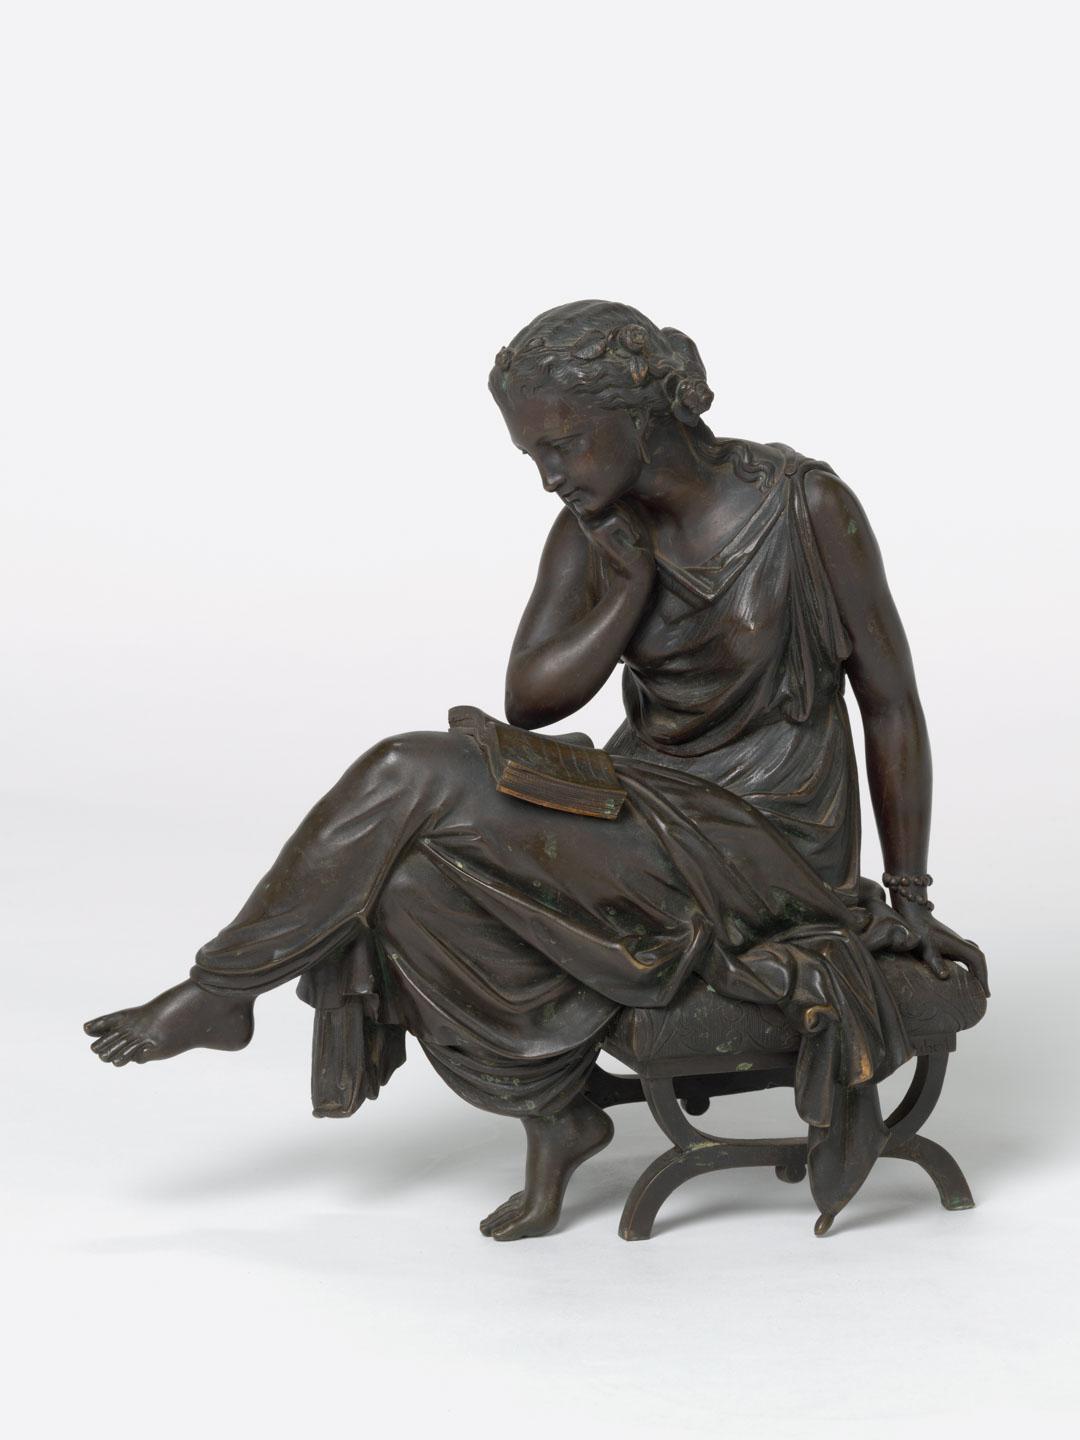 Artwork (Seated woman) this artwork made of Bronze